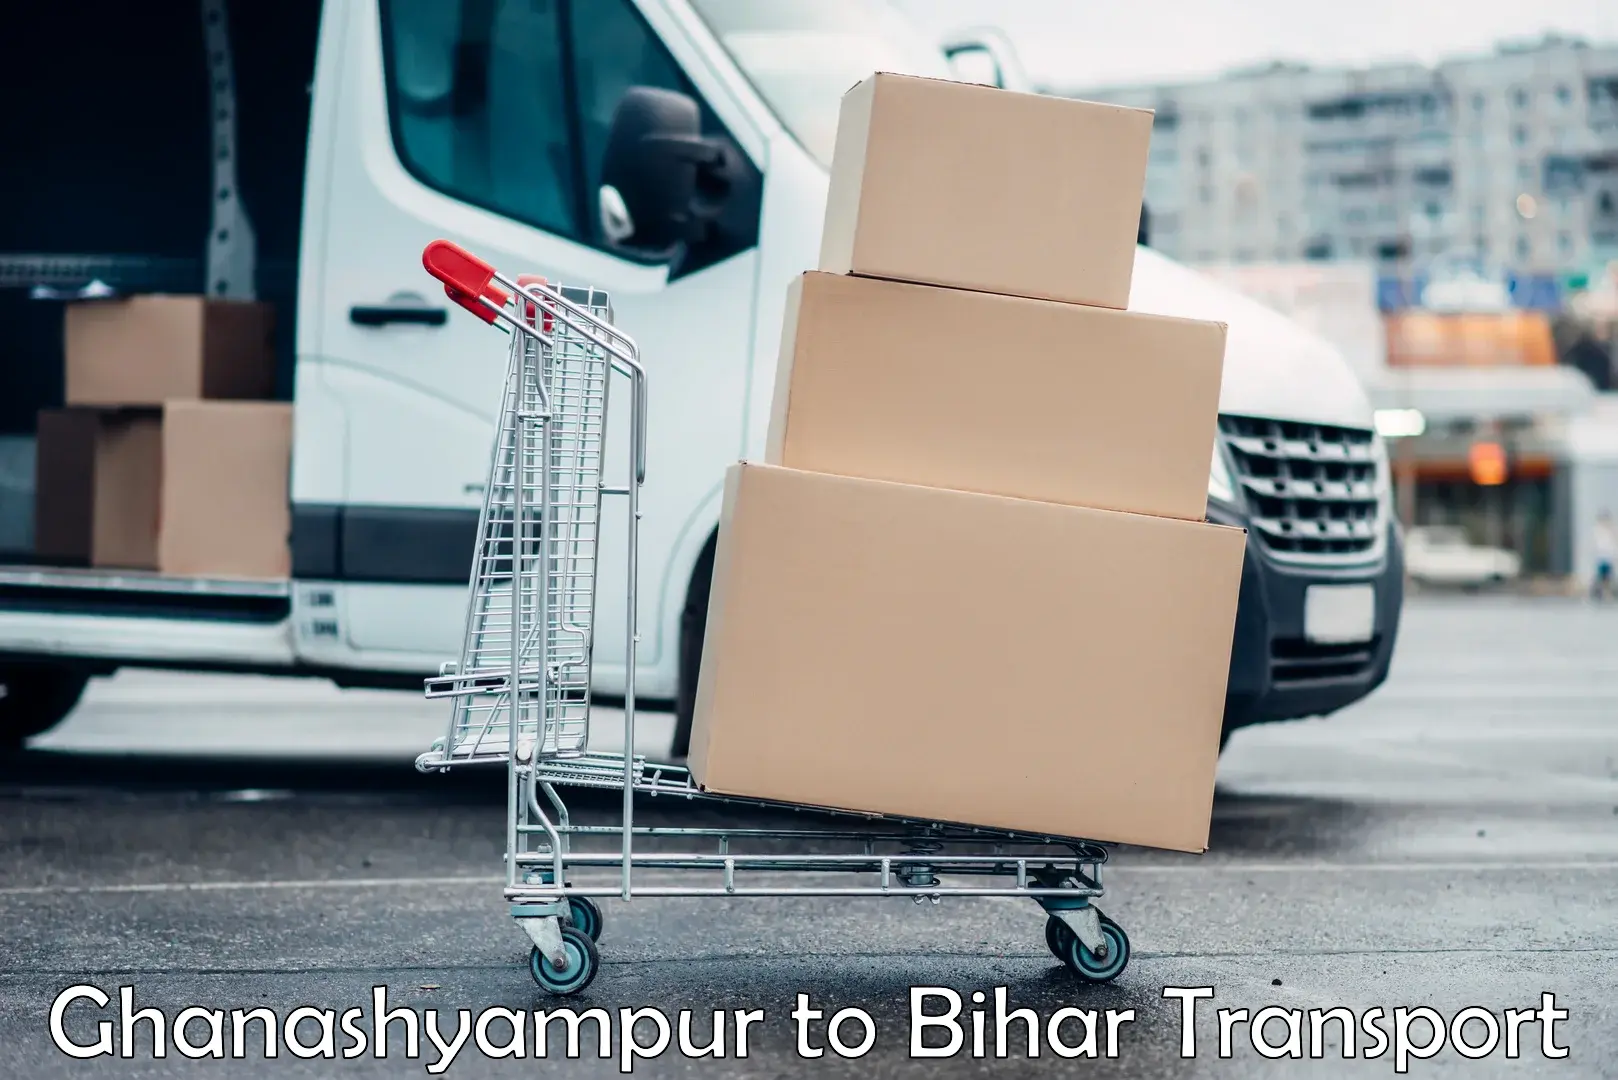 Truck transport companies in India Ghanashyampur to Patna